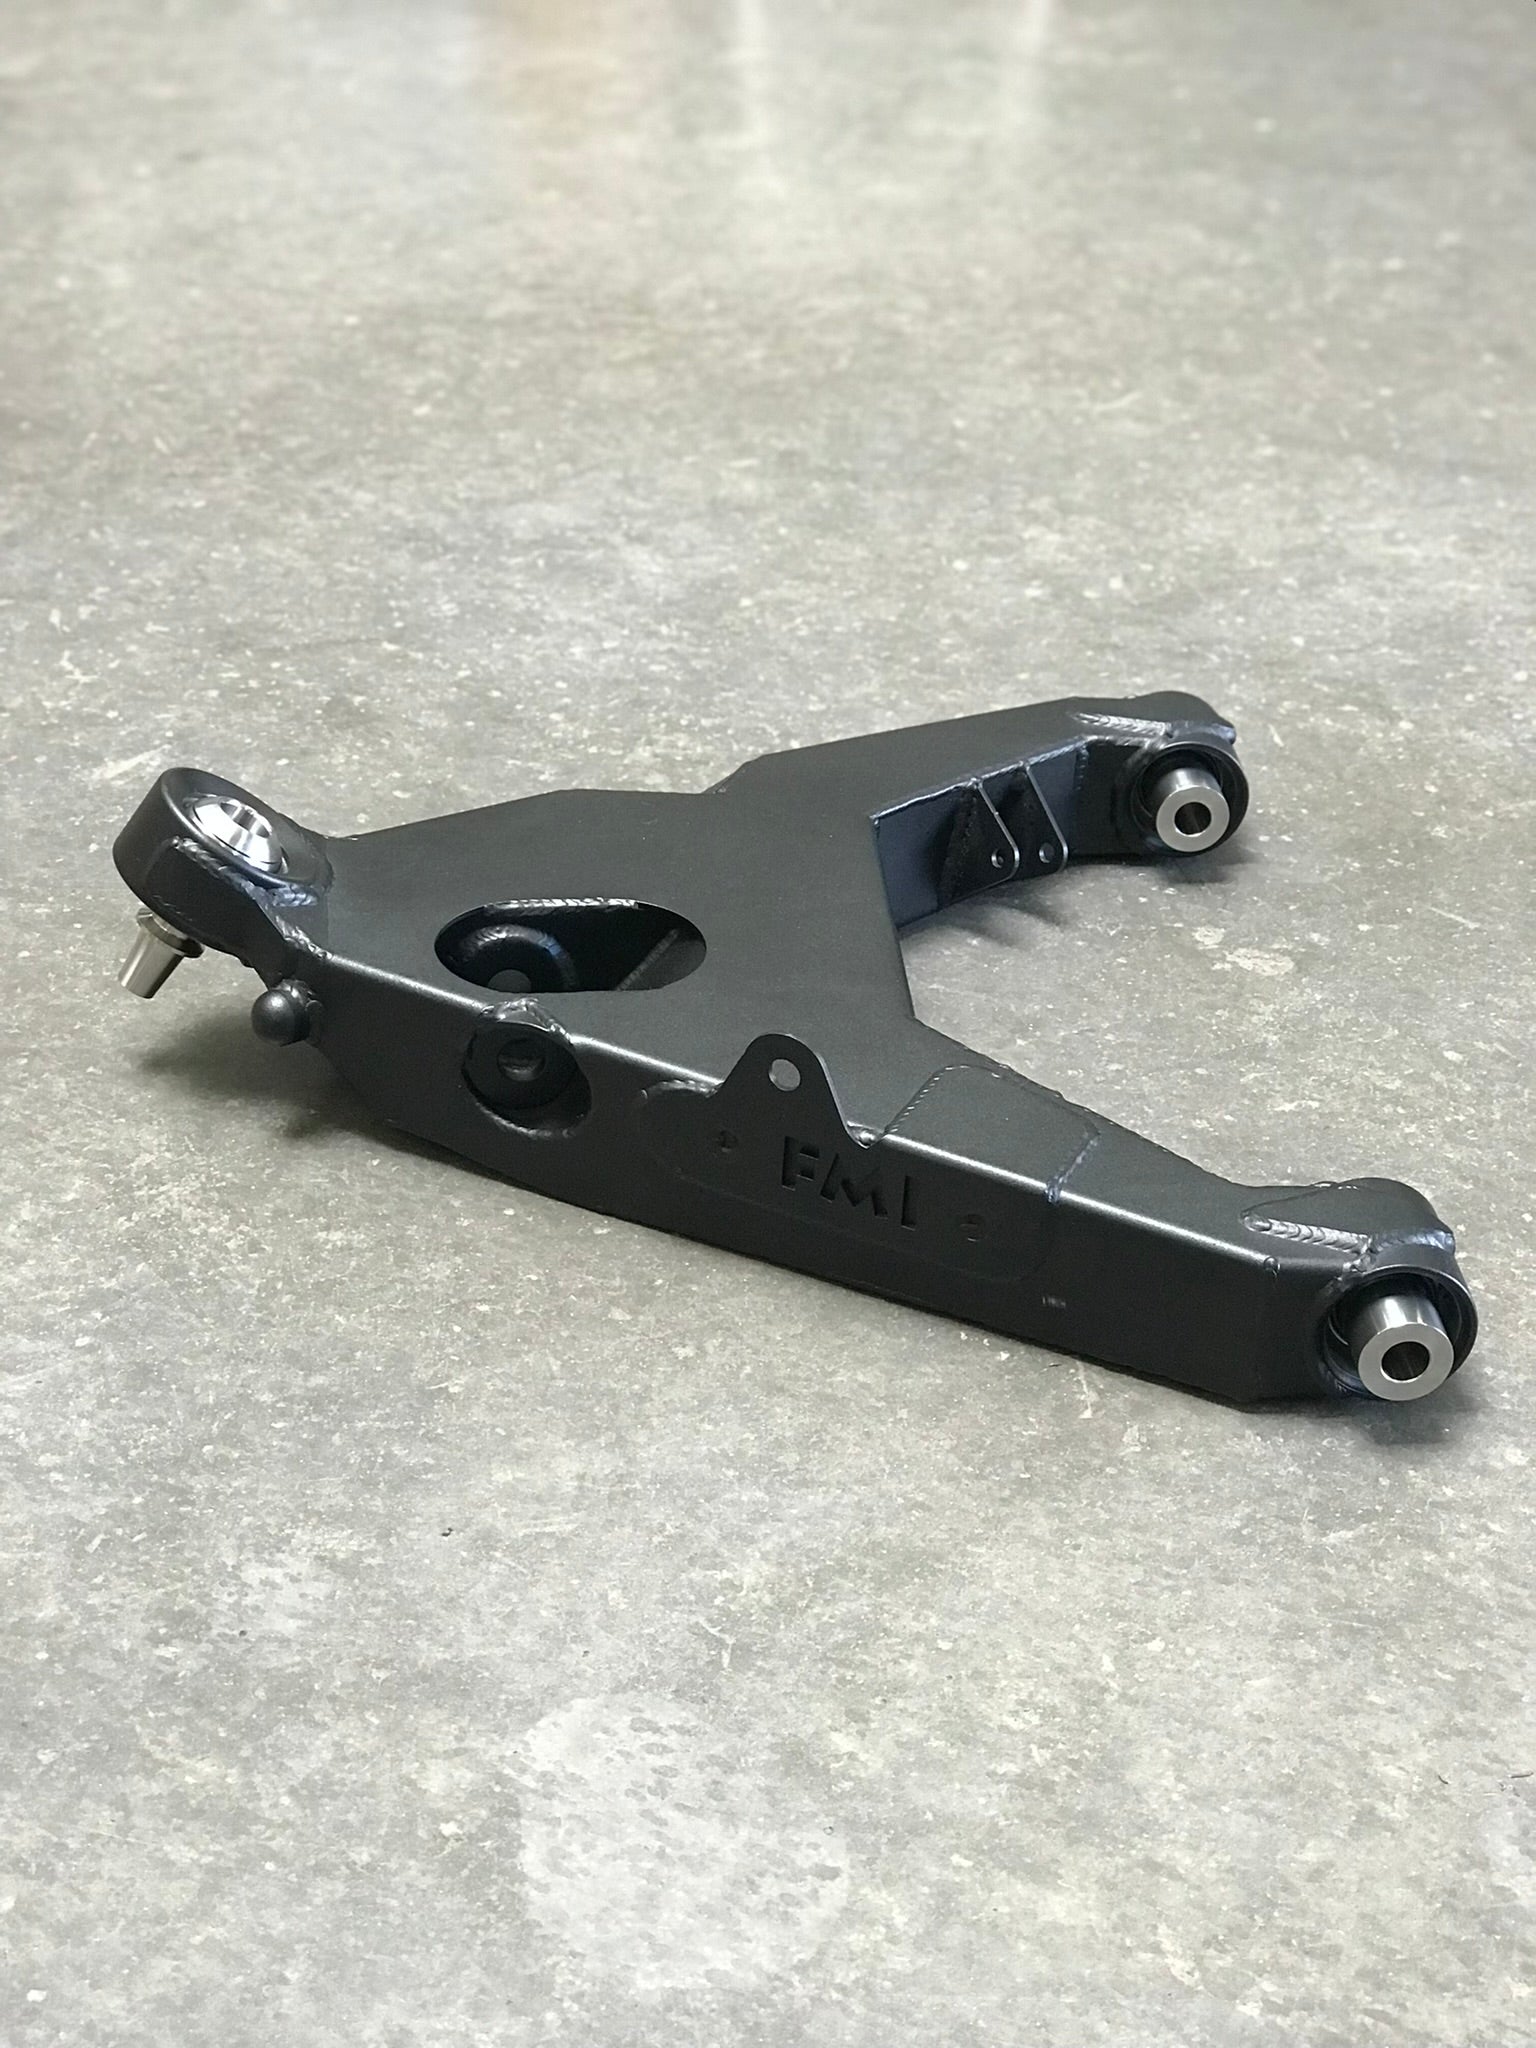 Gen 3 Raptor Stock Length Fabricated Replacement Lower A-Arm kit